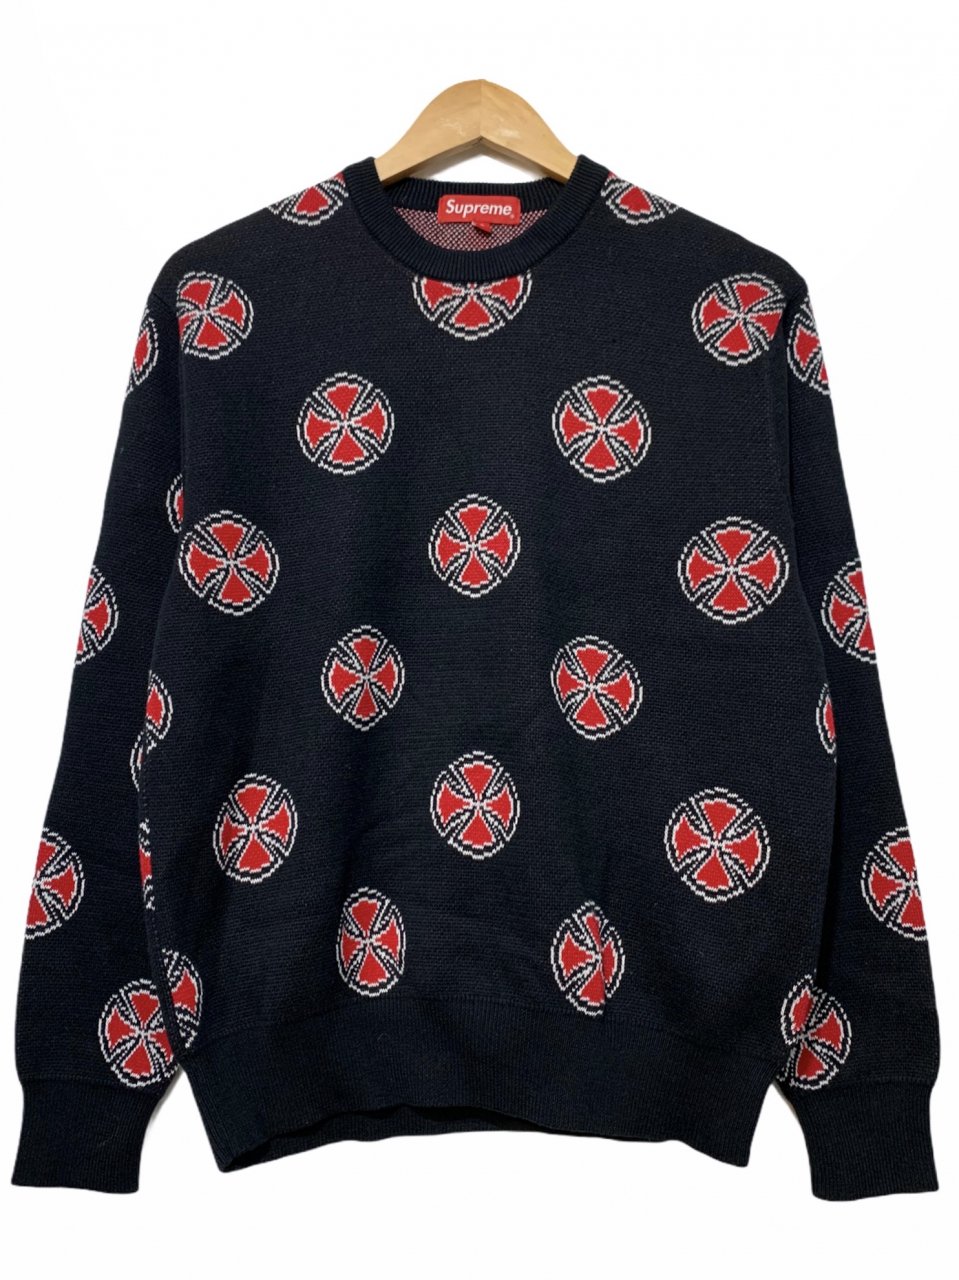 15AW SUPREME × INDEPENDENT Crosses Sweater 黒 S シュプリーム ...